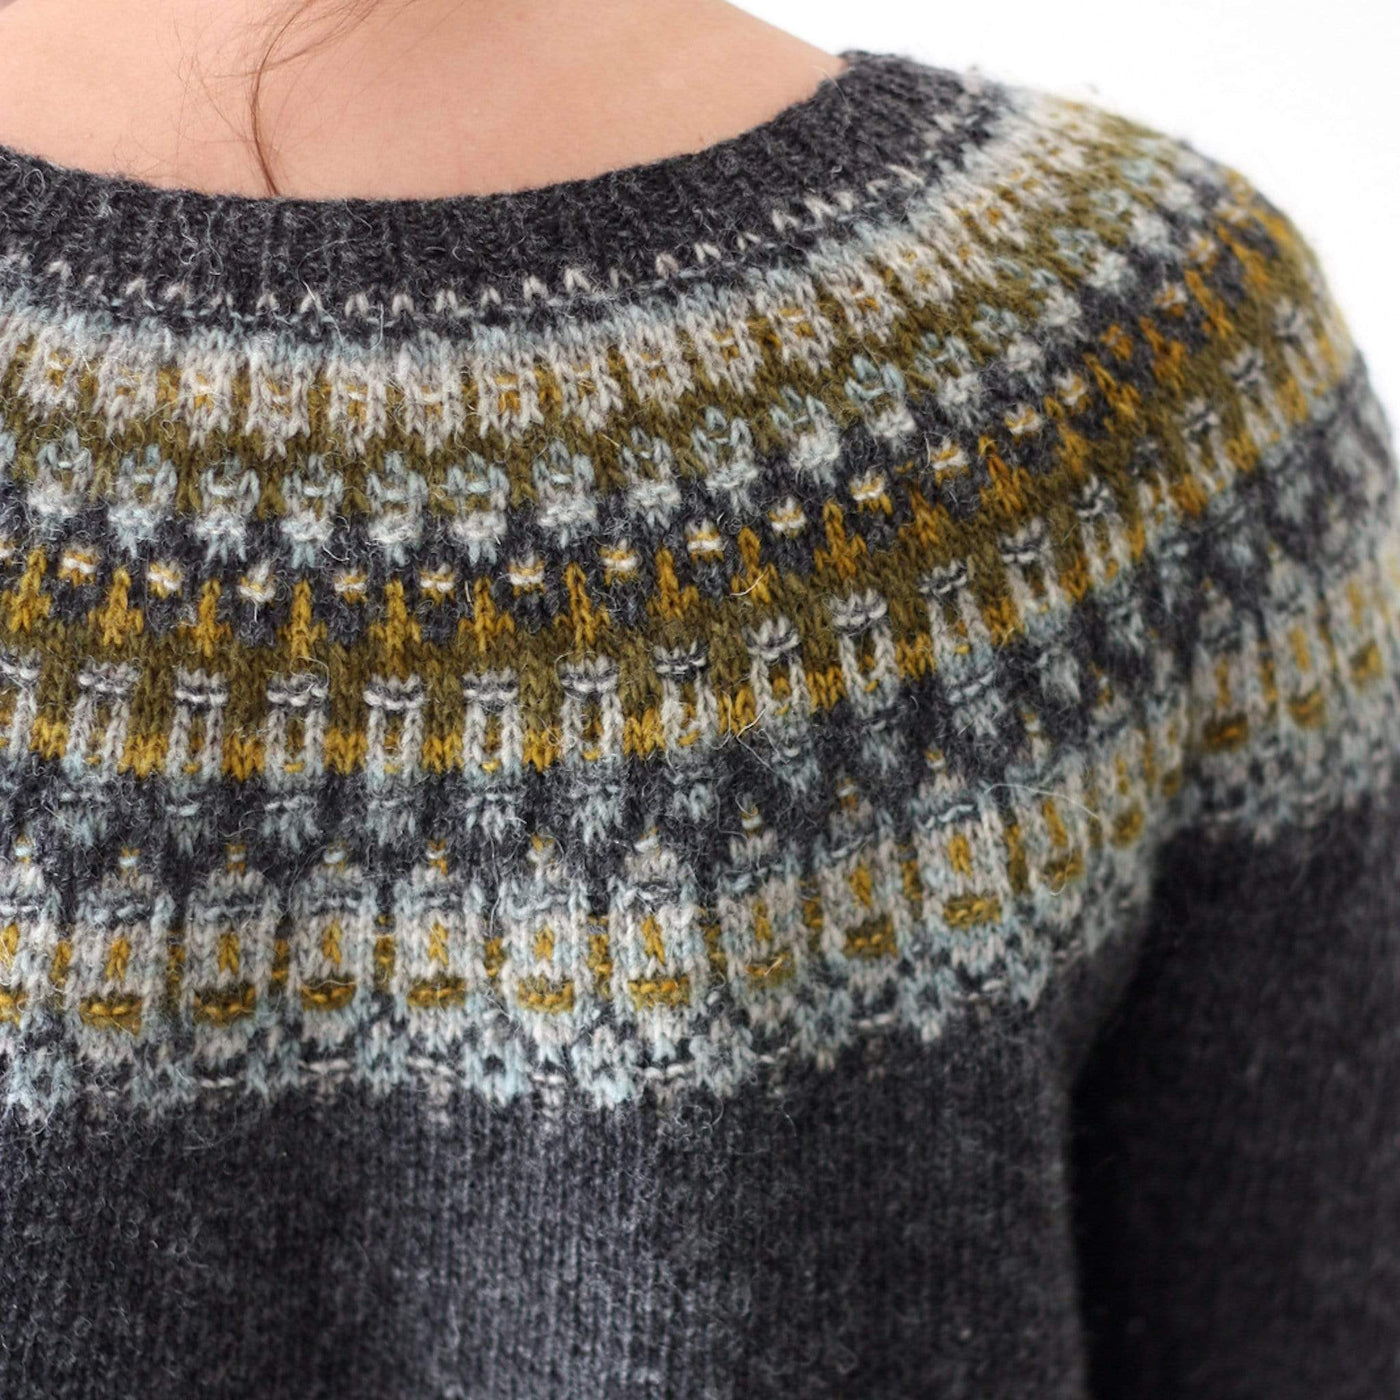 Shown close up of colorwork on model, the Lunenburg Pullover by Amy Christoffers, knit in Lichen and Lace Rustic Sport weight yarn. 